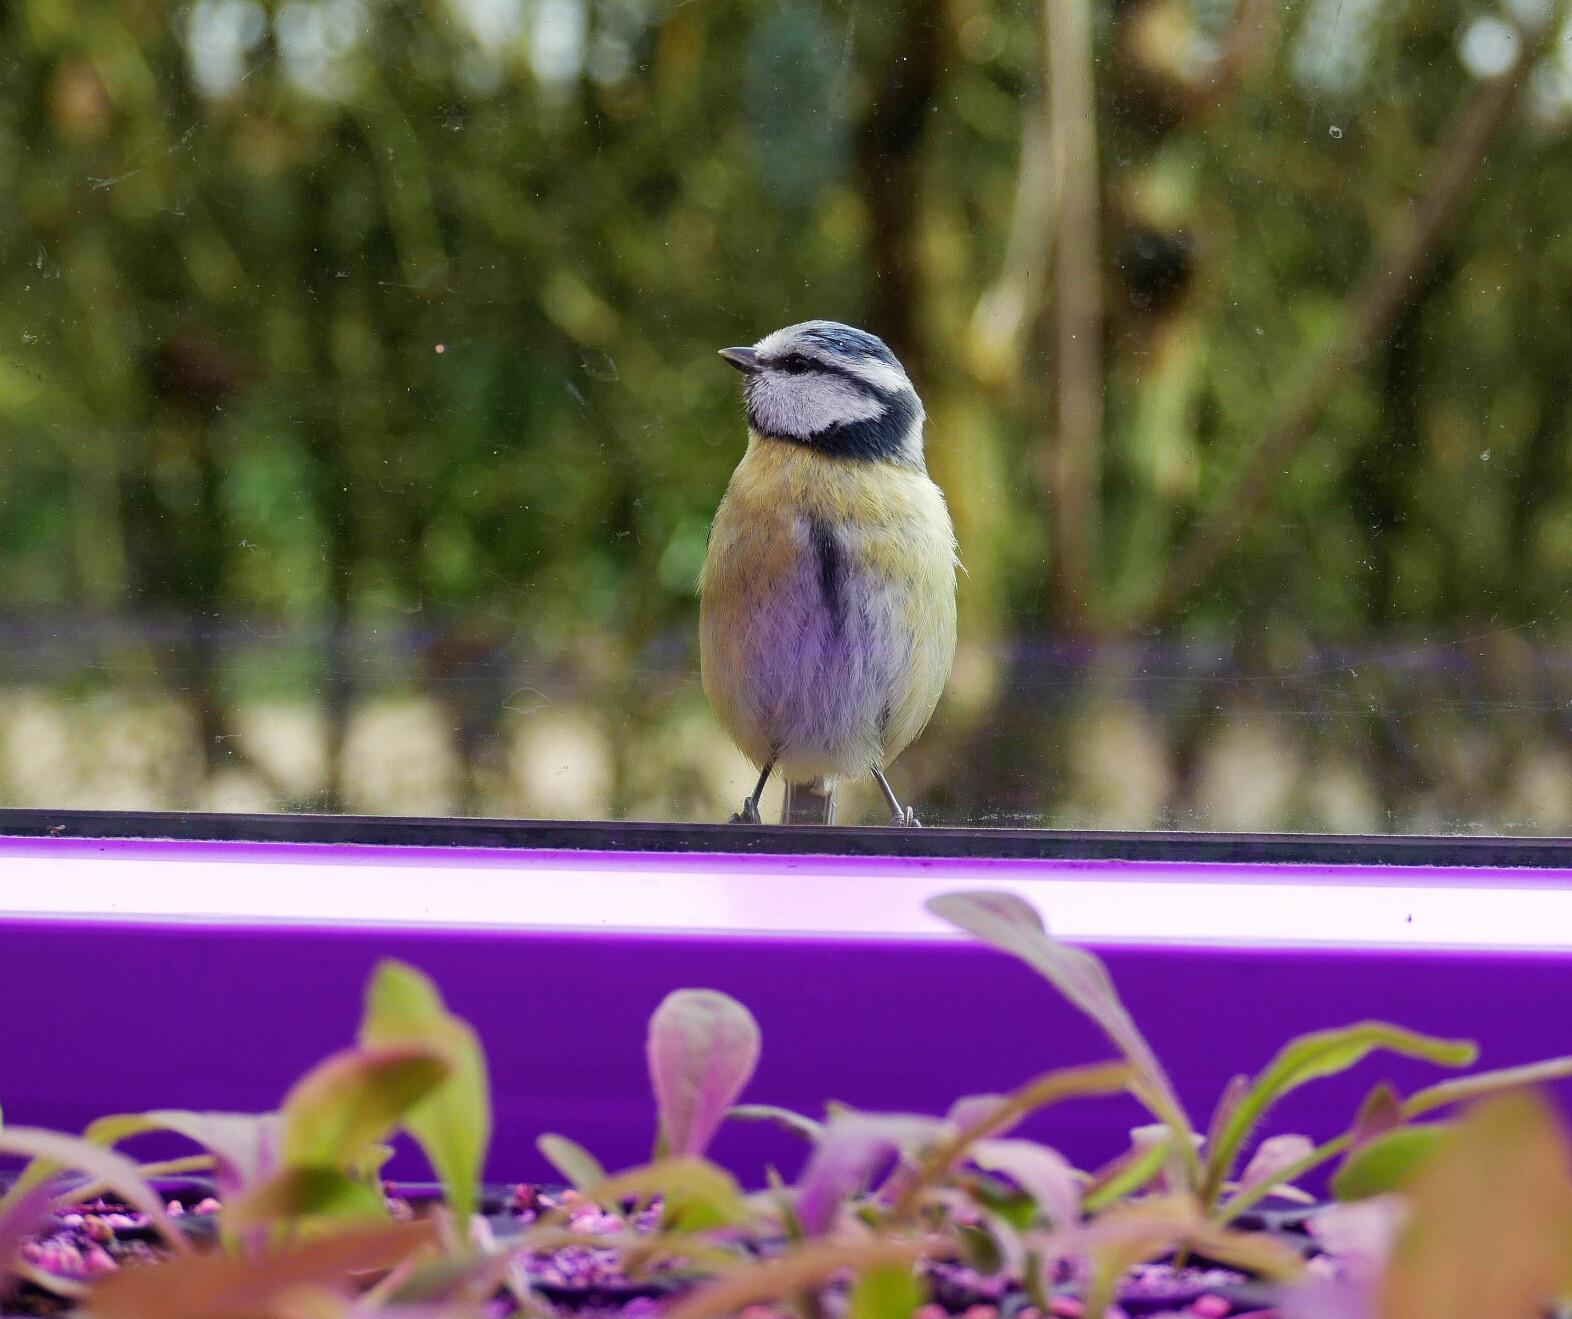 blue tit behind a window pane with plants under grow lights in front